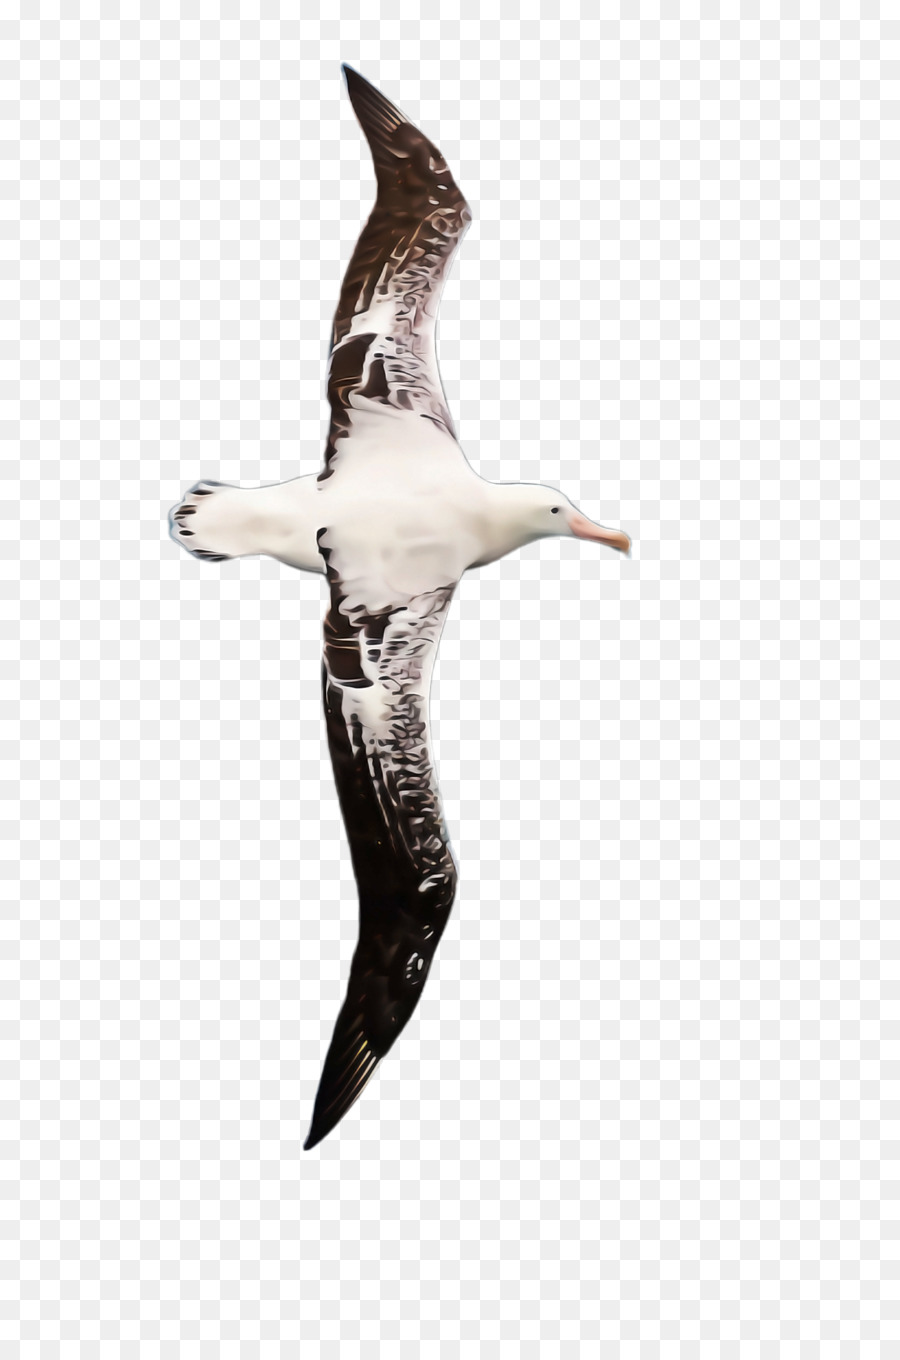 Aves，Aves Marinhas PNG